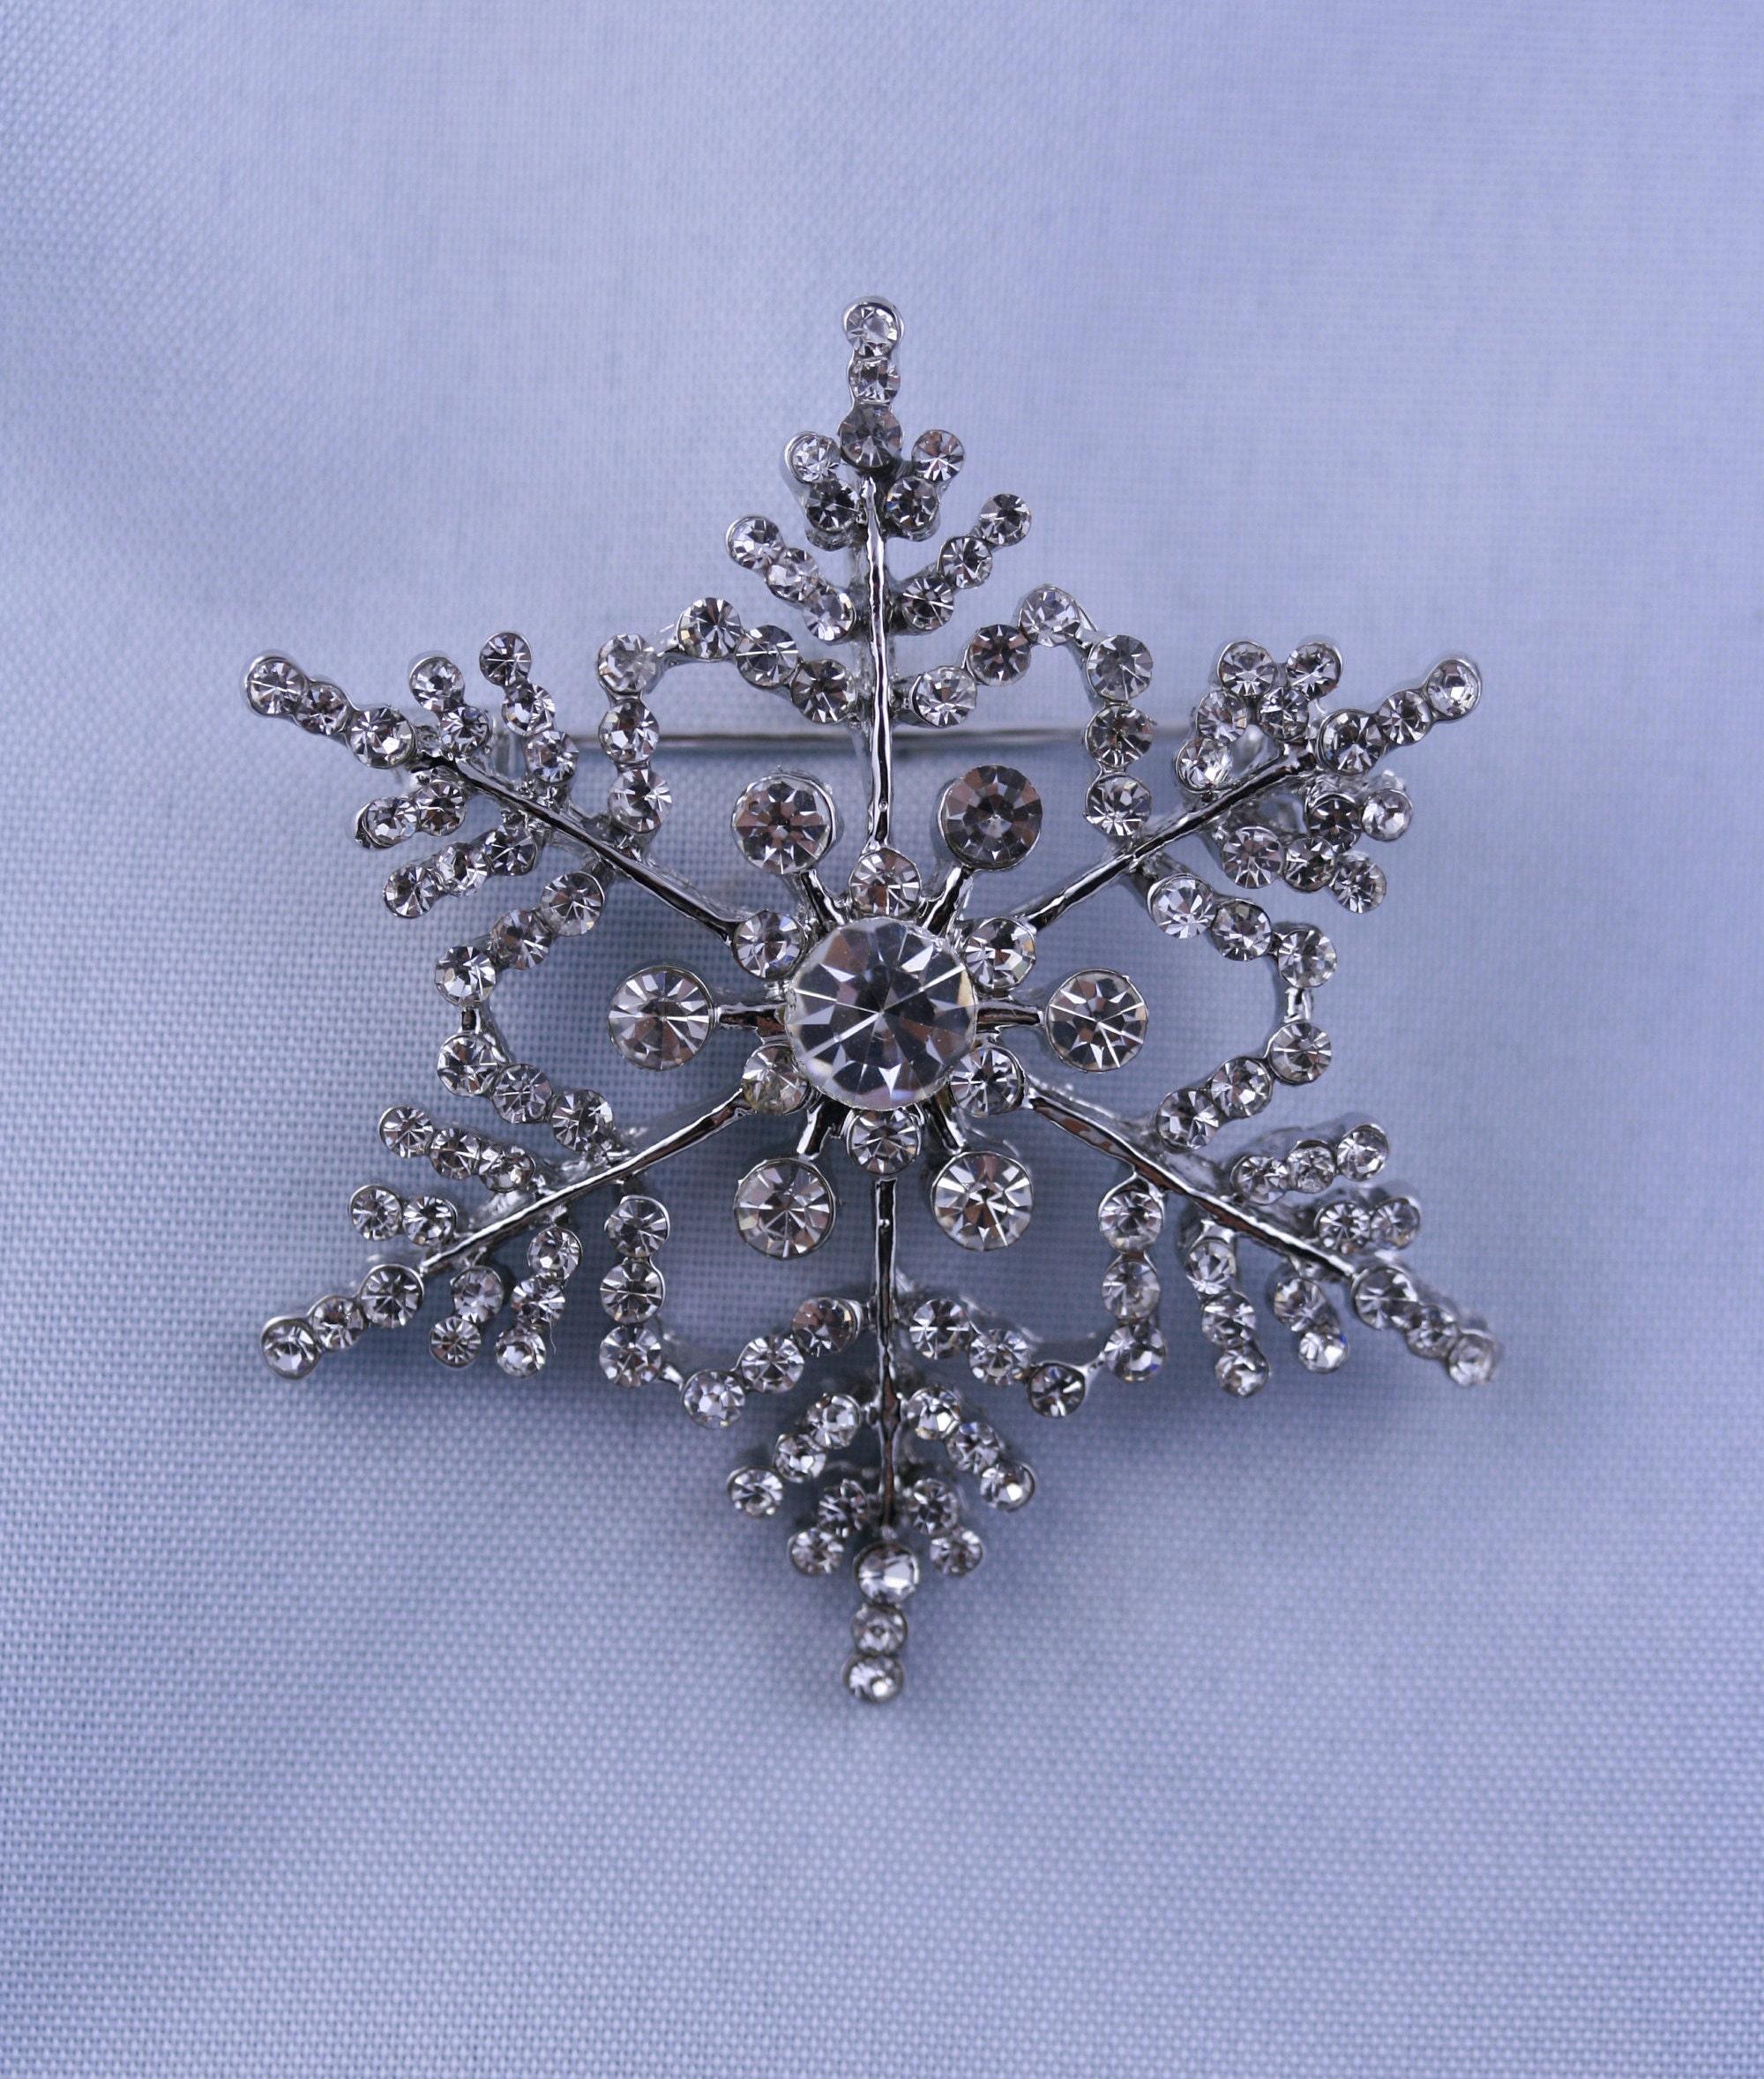 Lauren-Spencer Christmas Snowflake Brooch Pin for Women Girls Rhinestone Crystal Snowflake Brooch Pins Glitter Fashion Christmas Brooches and Pins